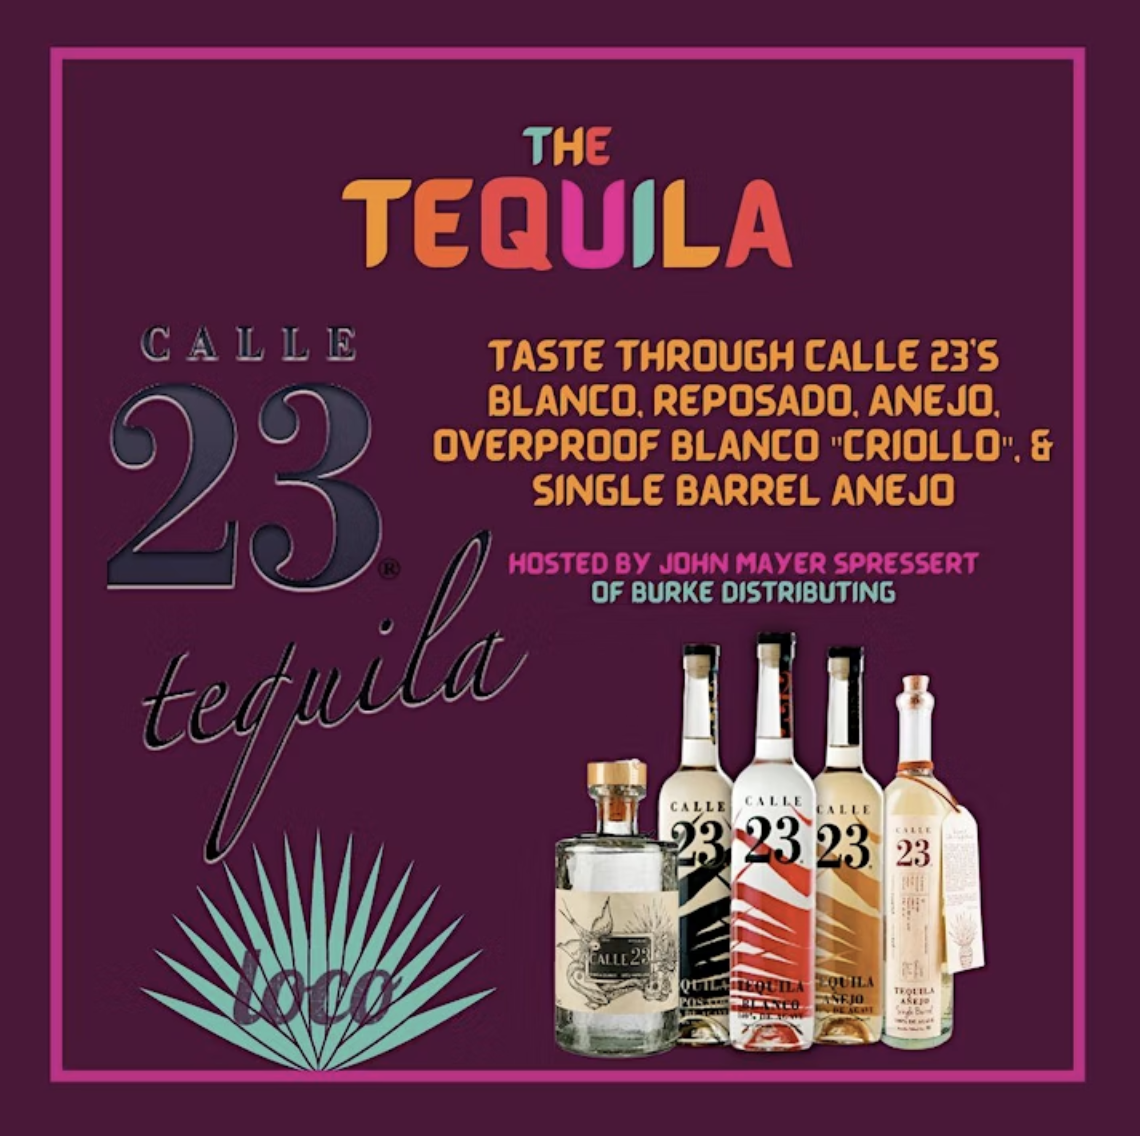 Tequila Night Out at Loco - Boston Restaurant News and Events